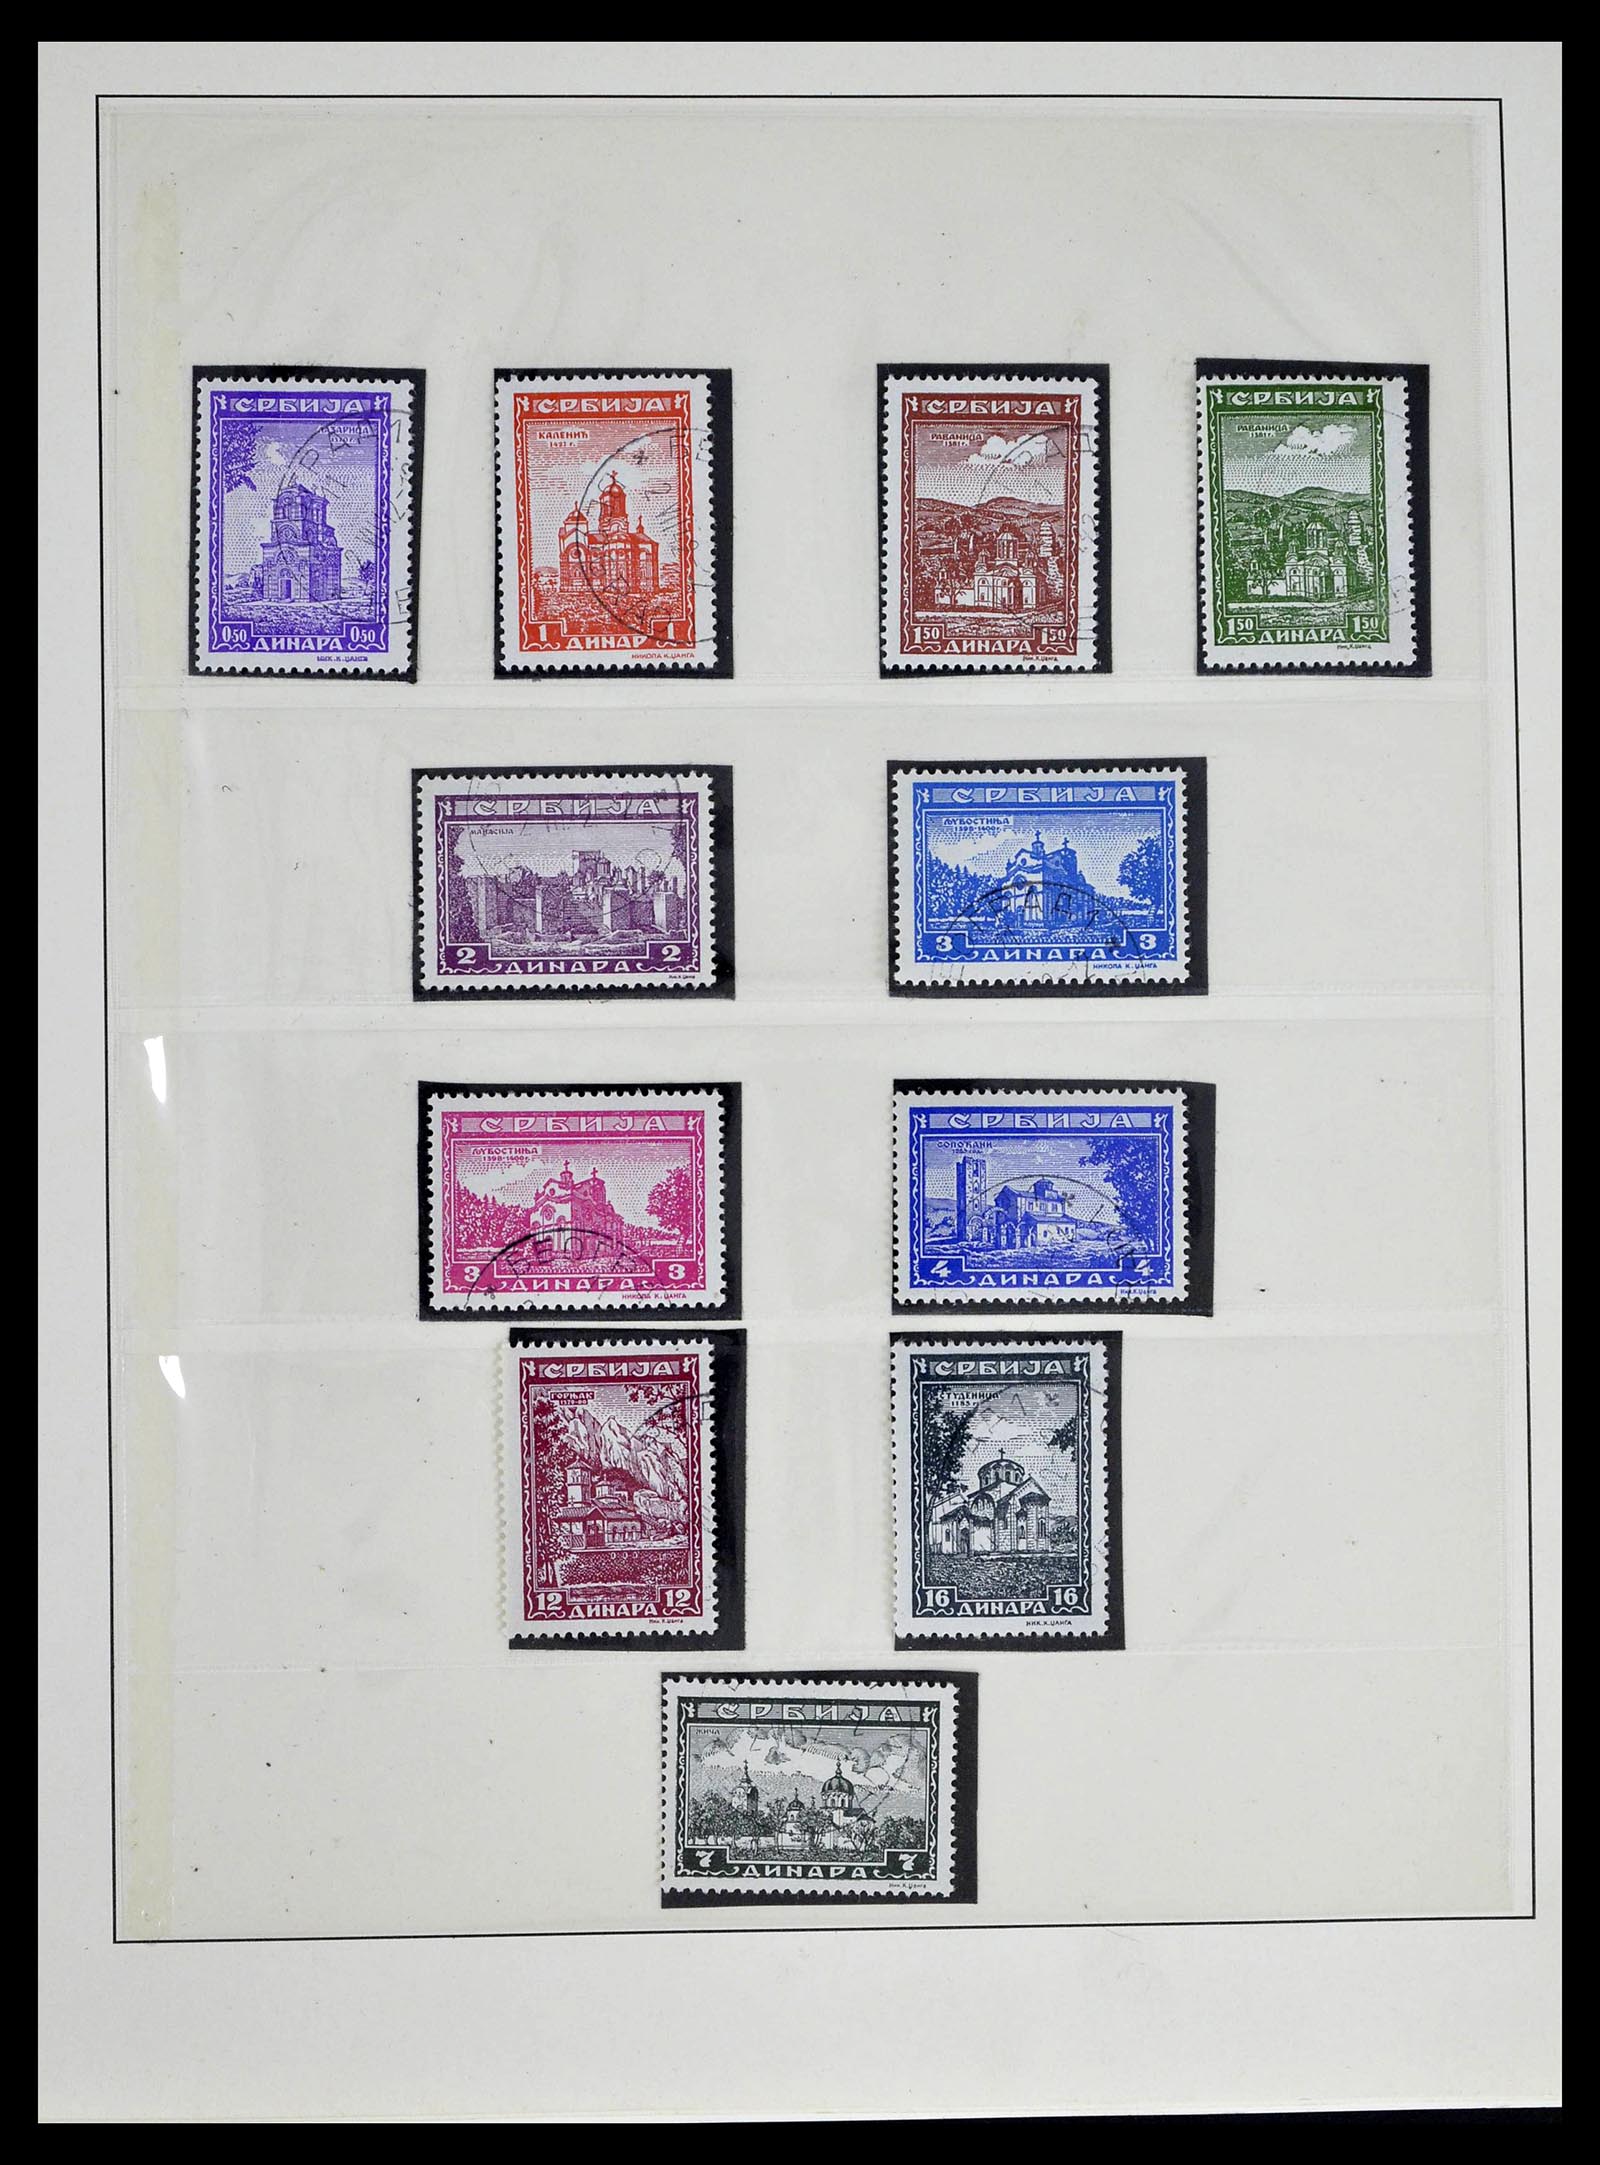 39396 0019 - Stamp collection 39396 German occupation WW II 1939-1945.